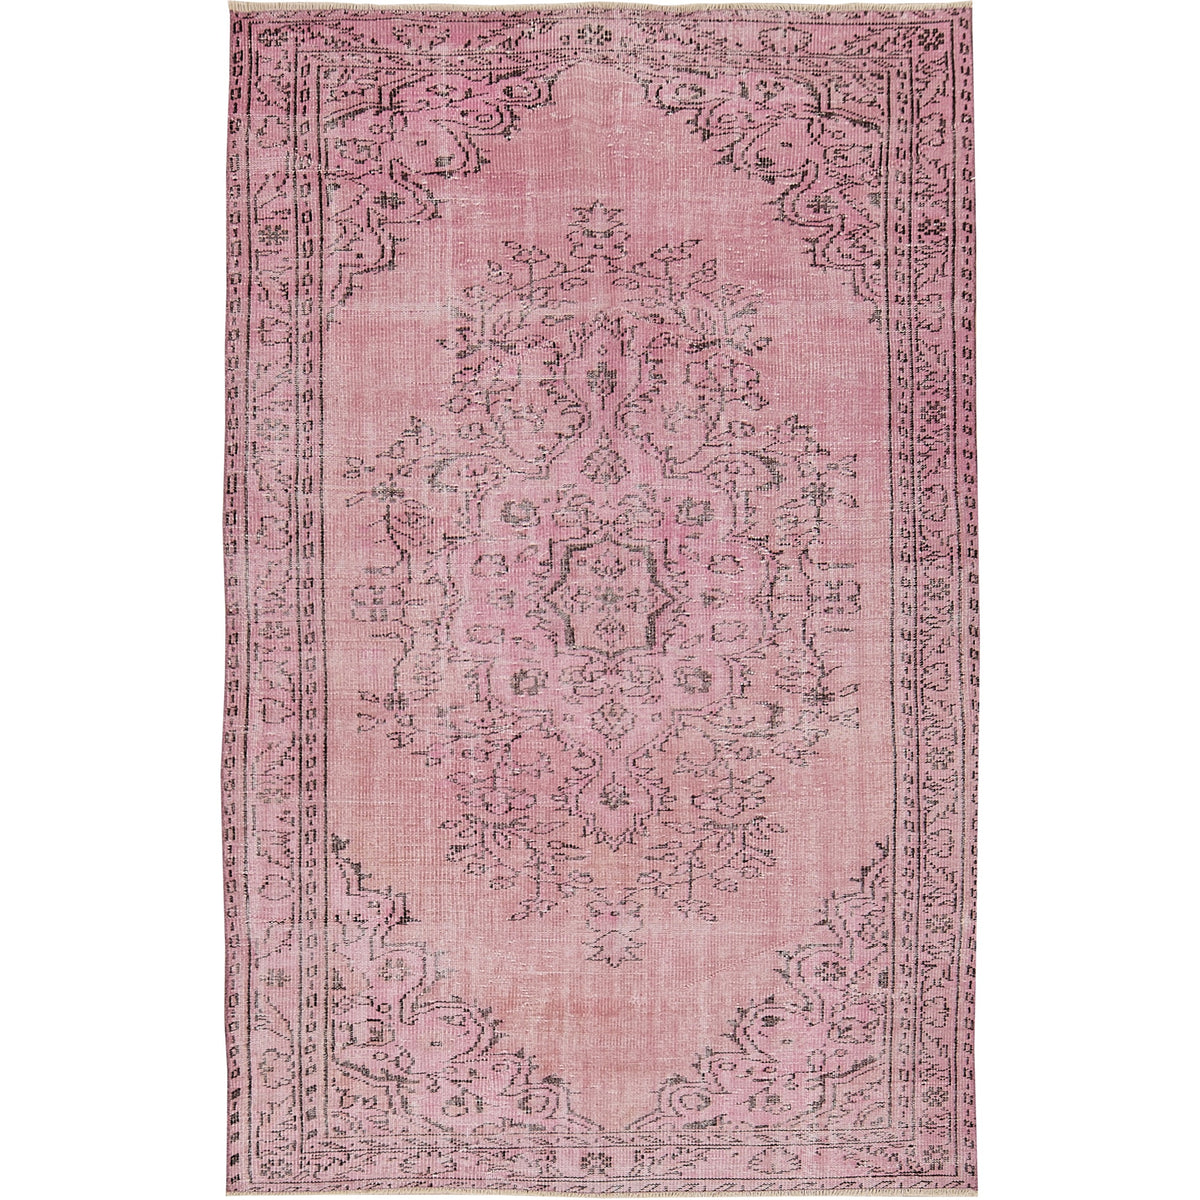 Lilliana | Handcrafted Elegance in Pink | Kuden Rugs